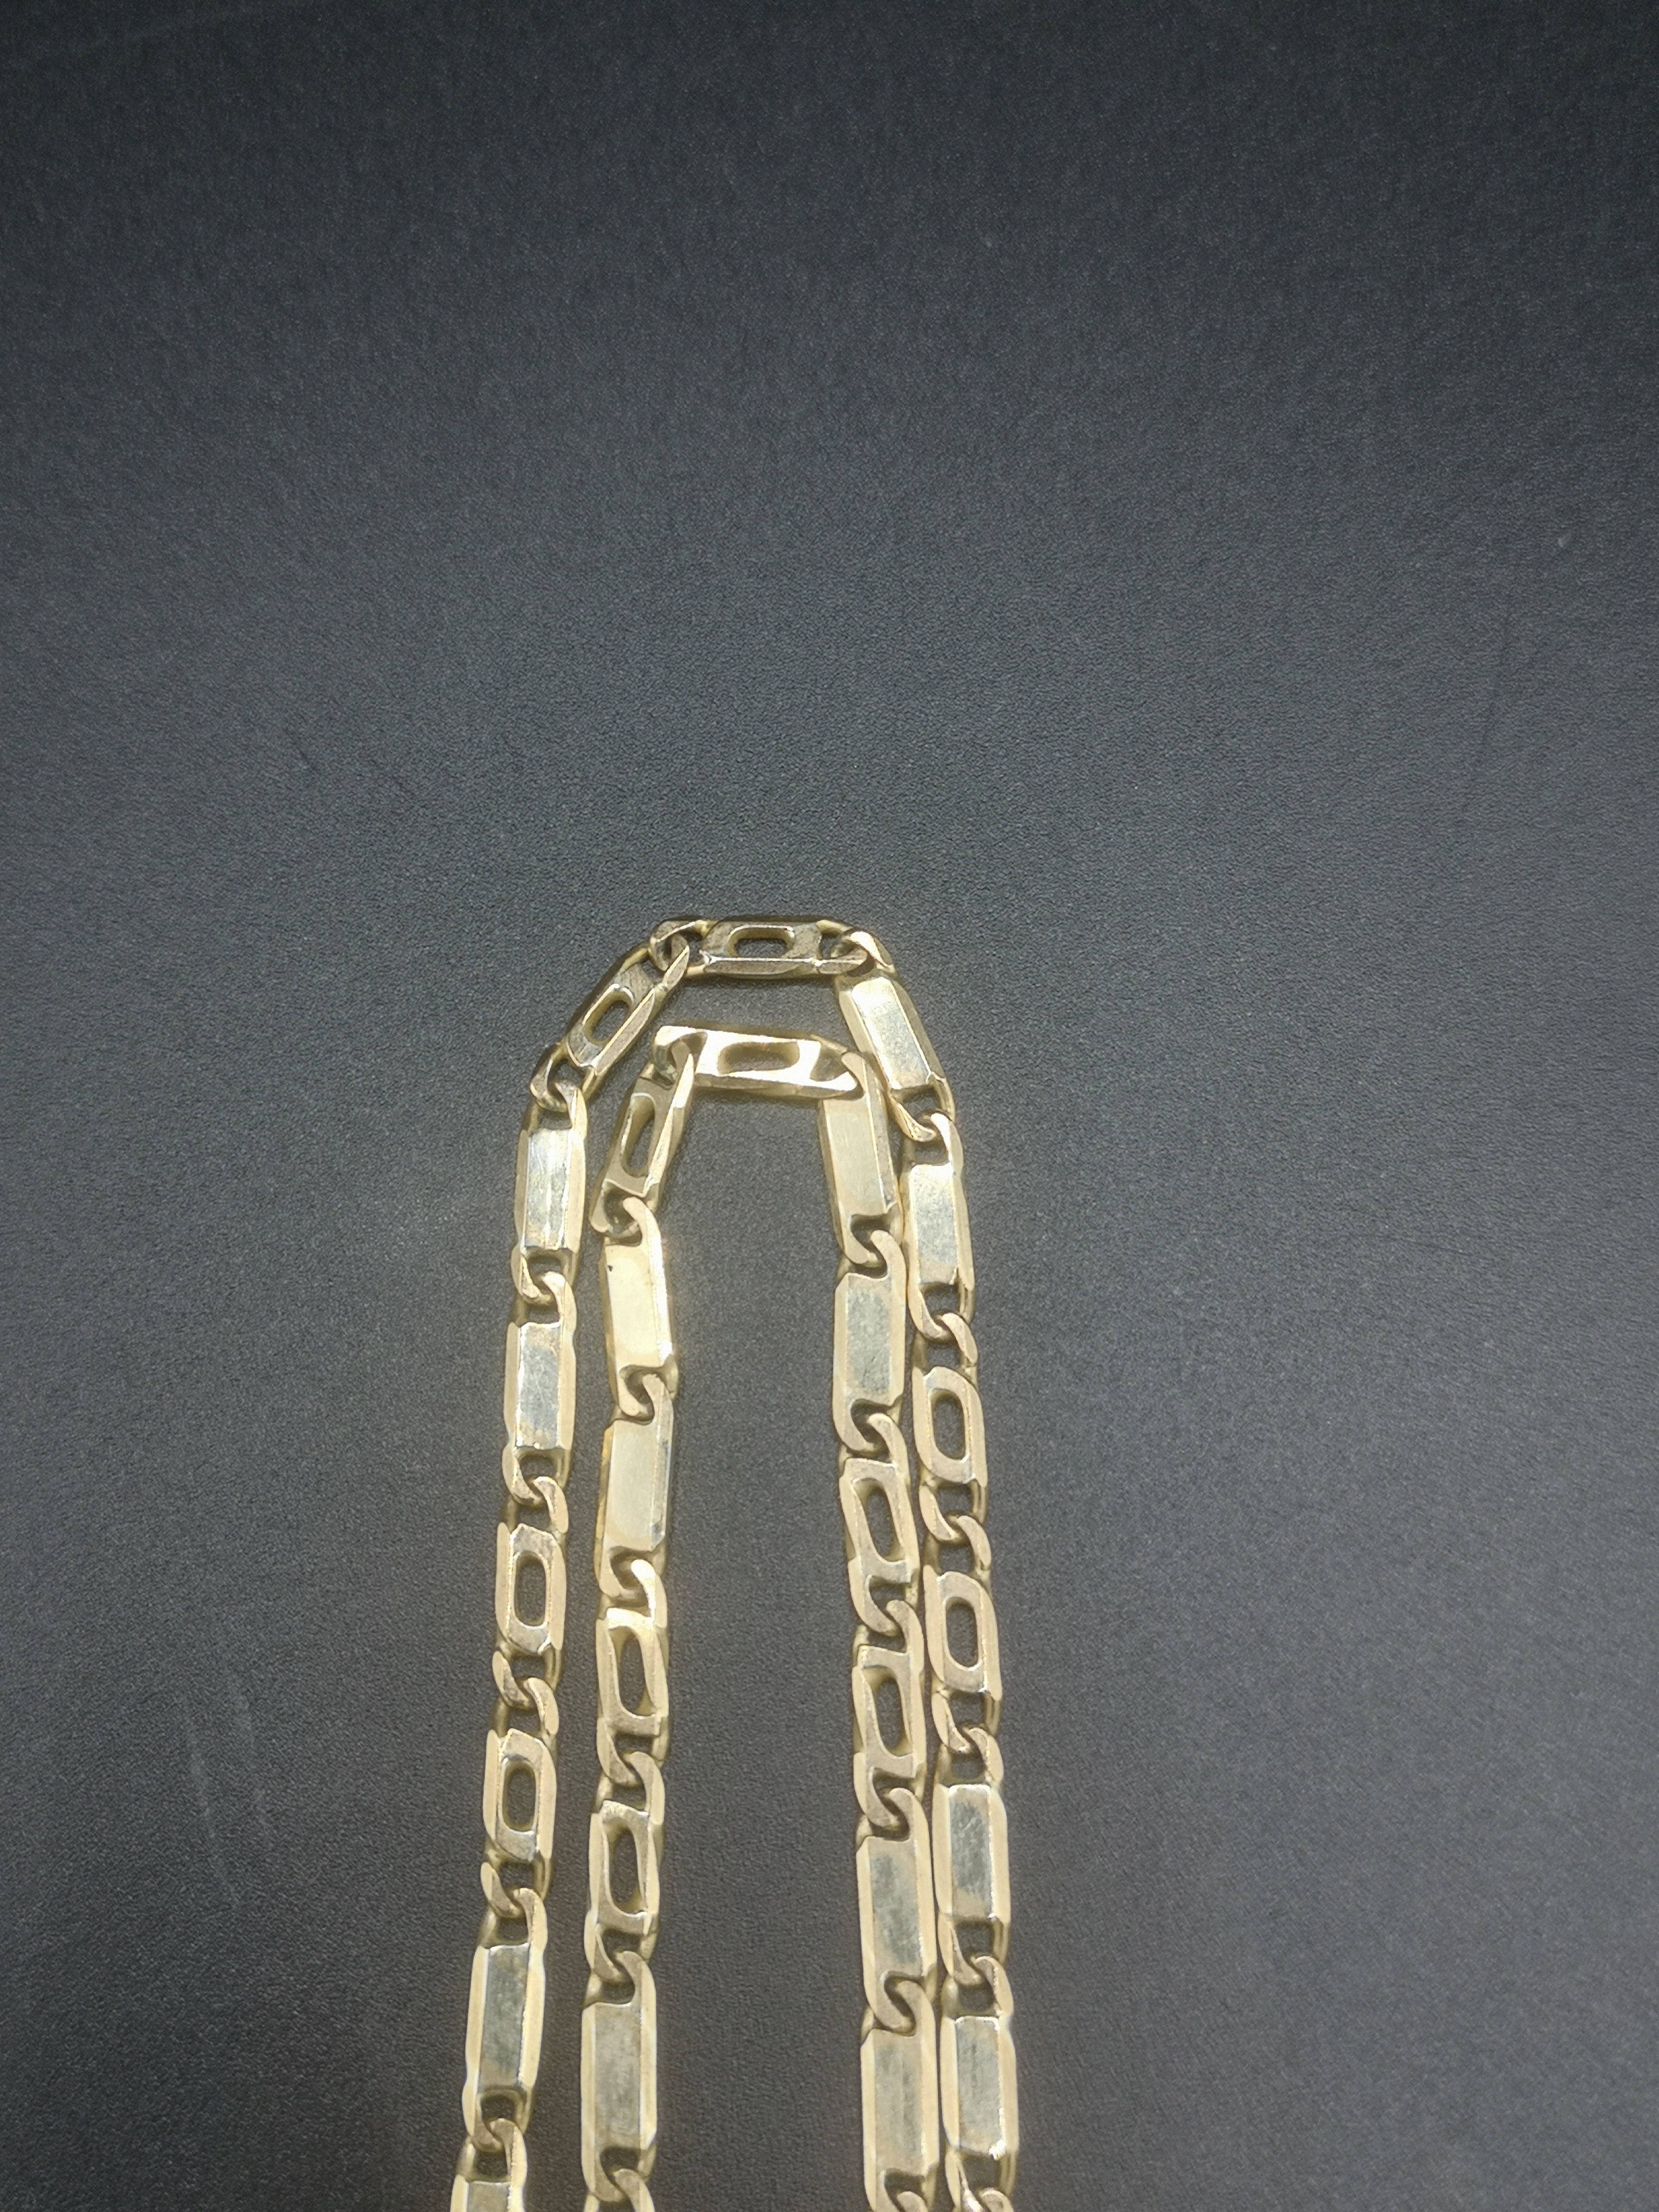 9ct gold necklace - Image 5 of 6